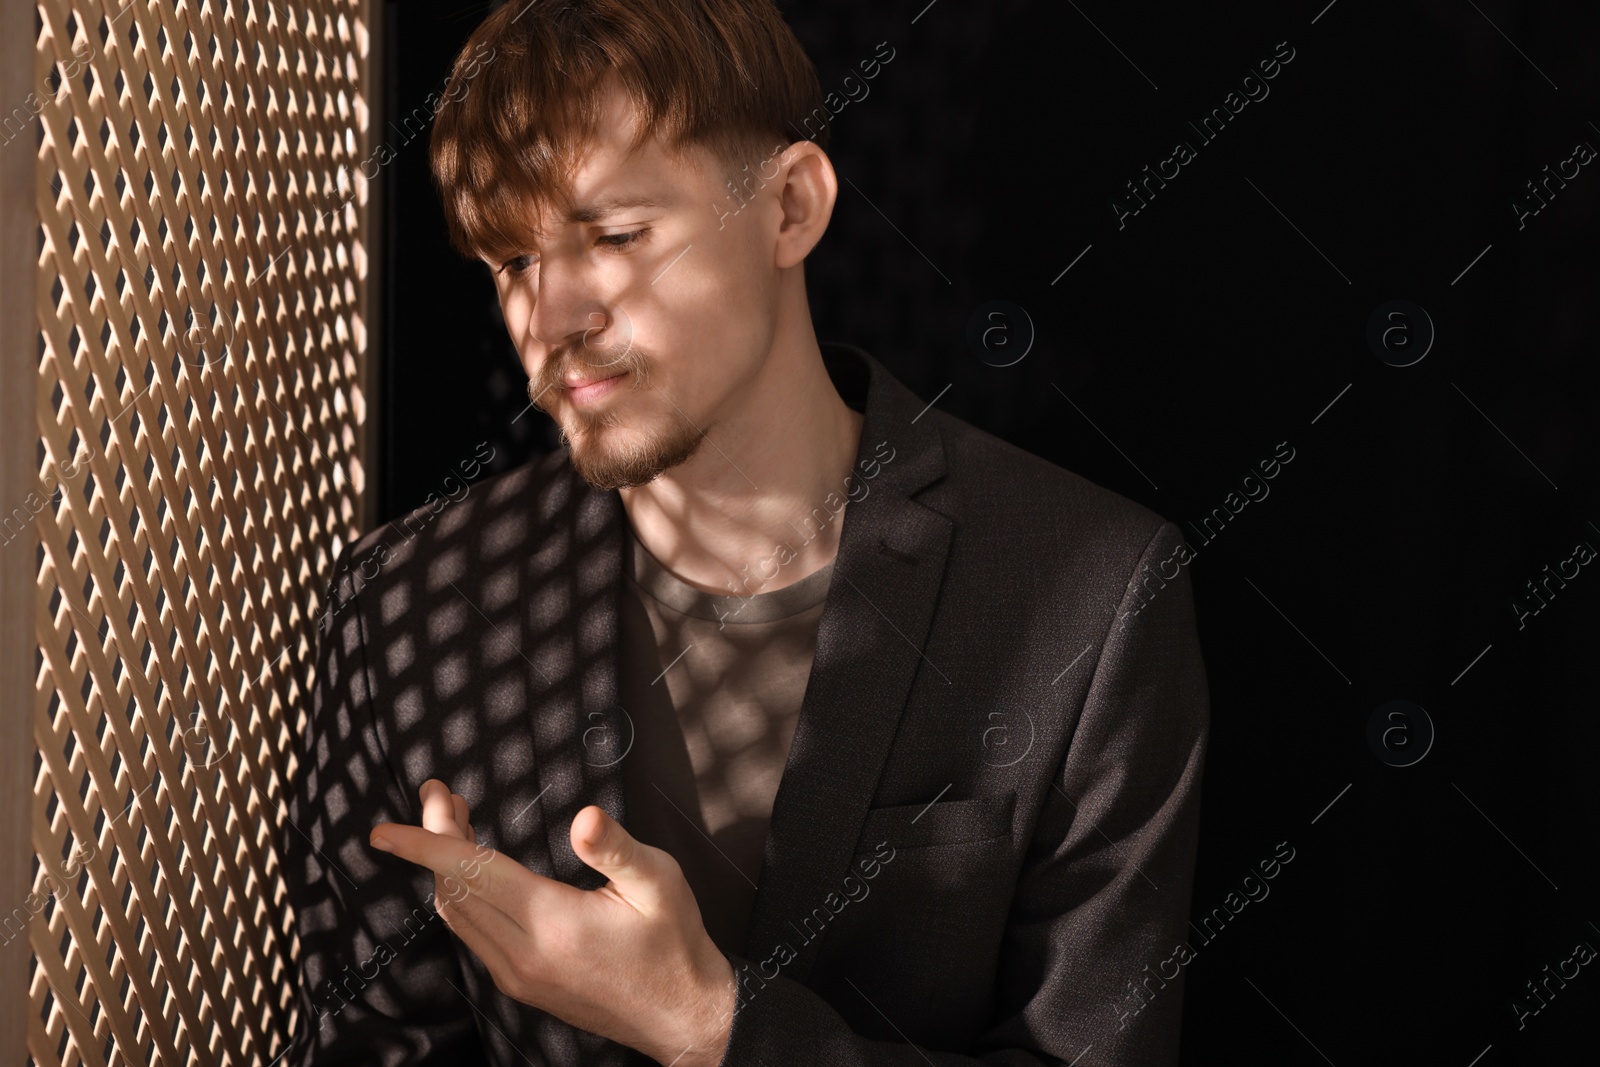 Photo of Upset young man during confession in booth